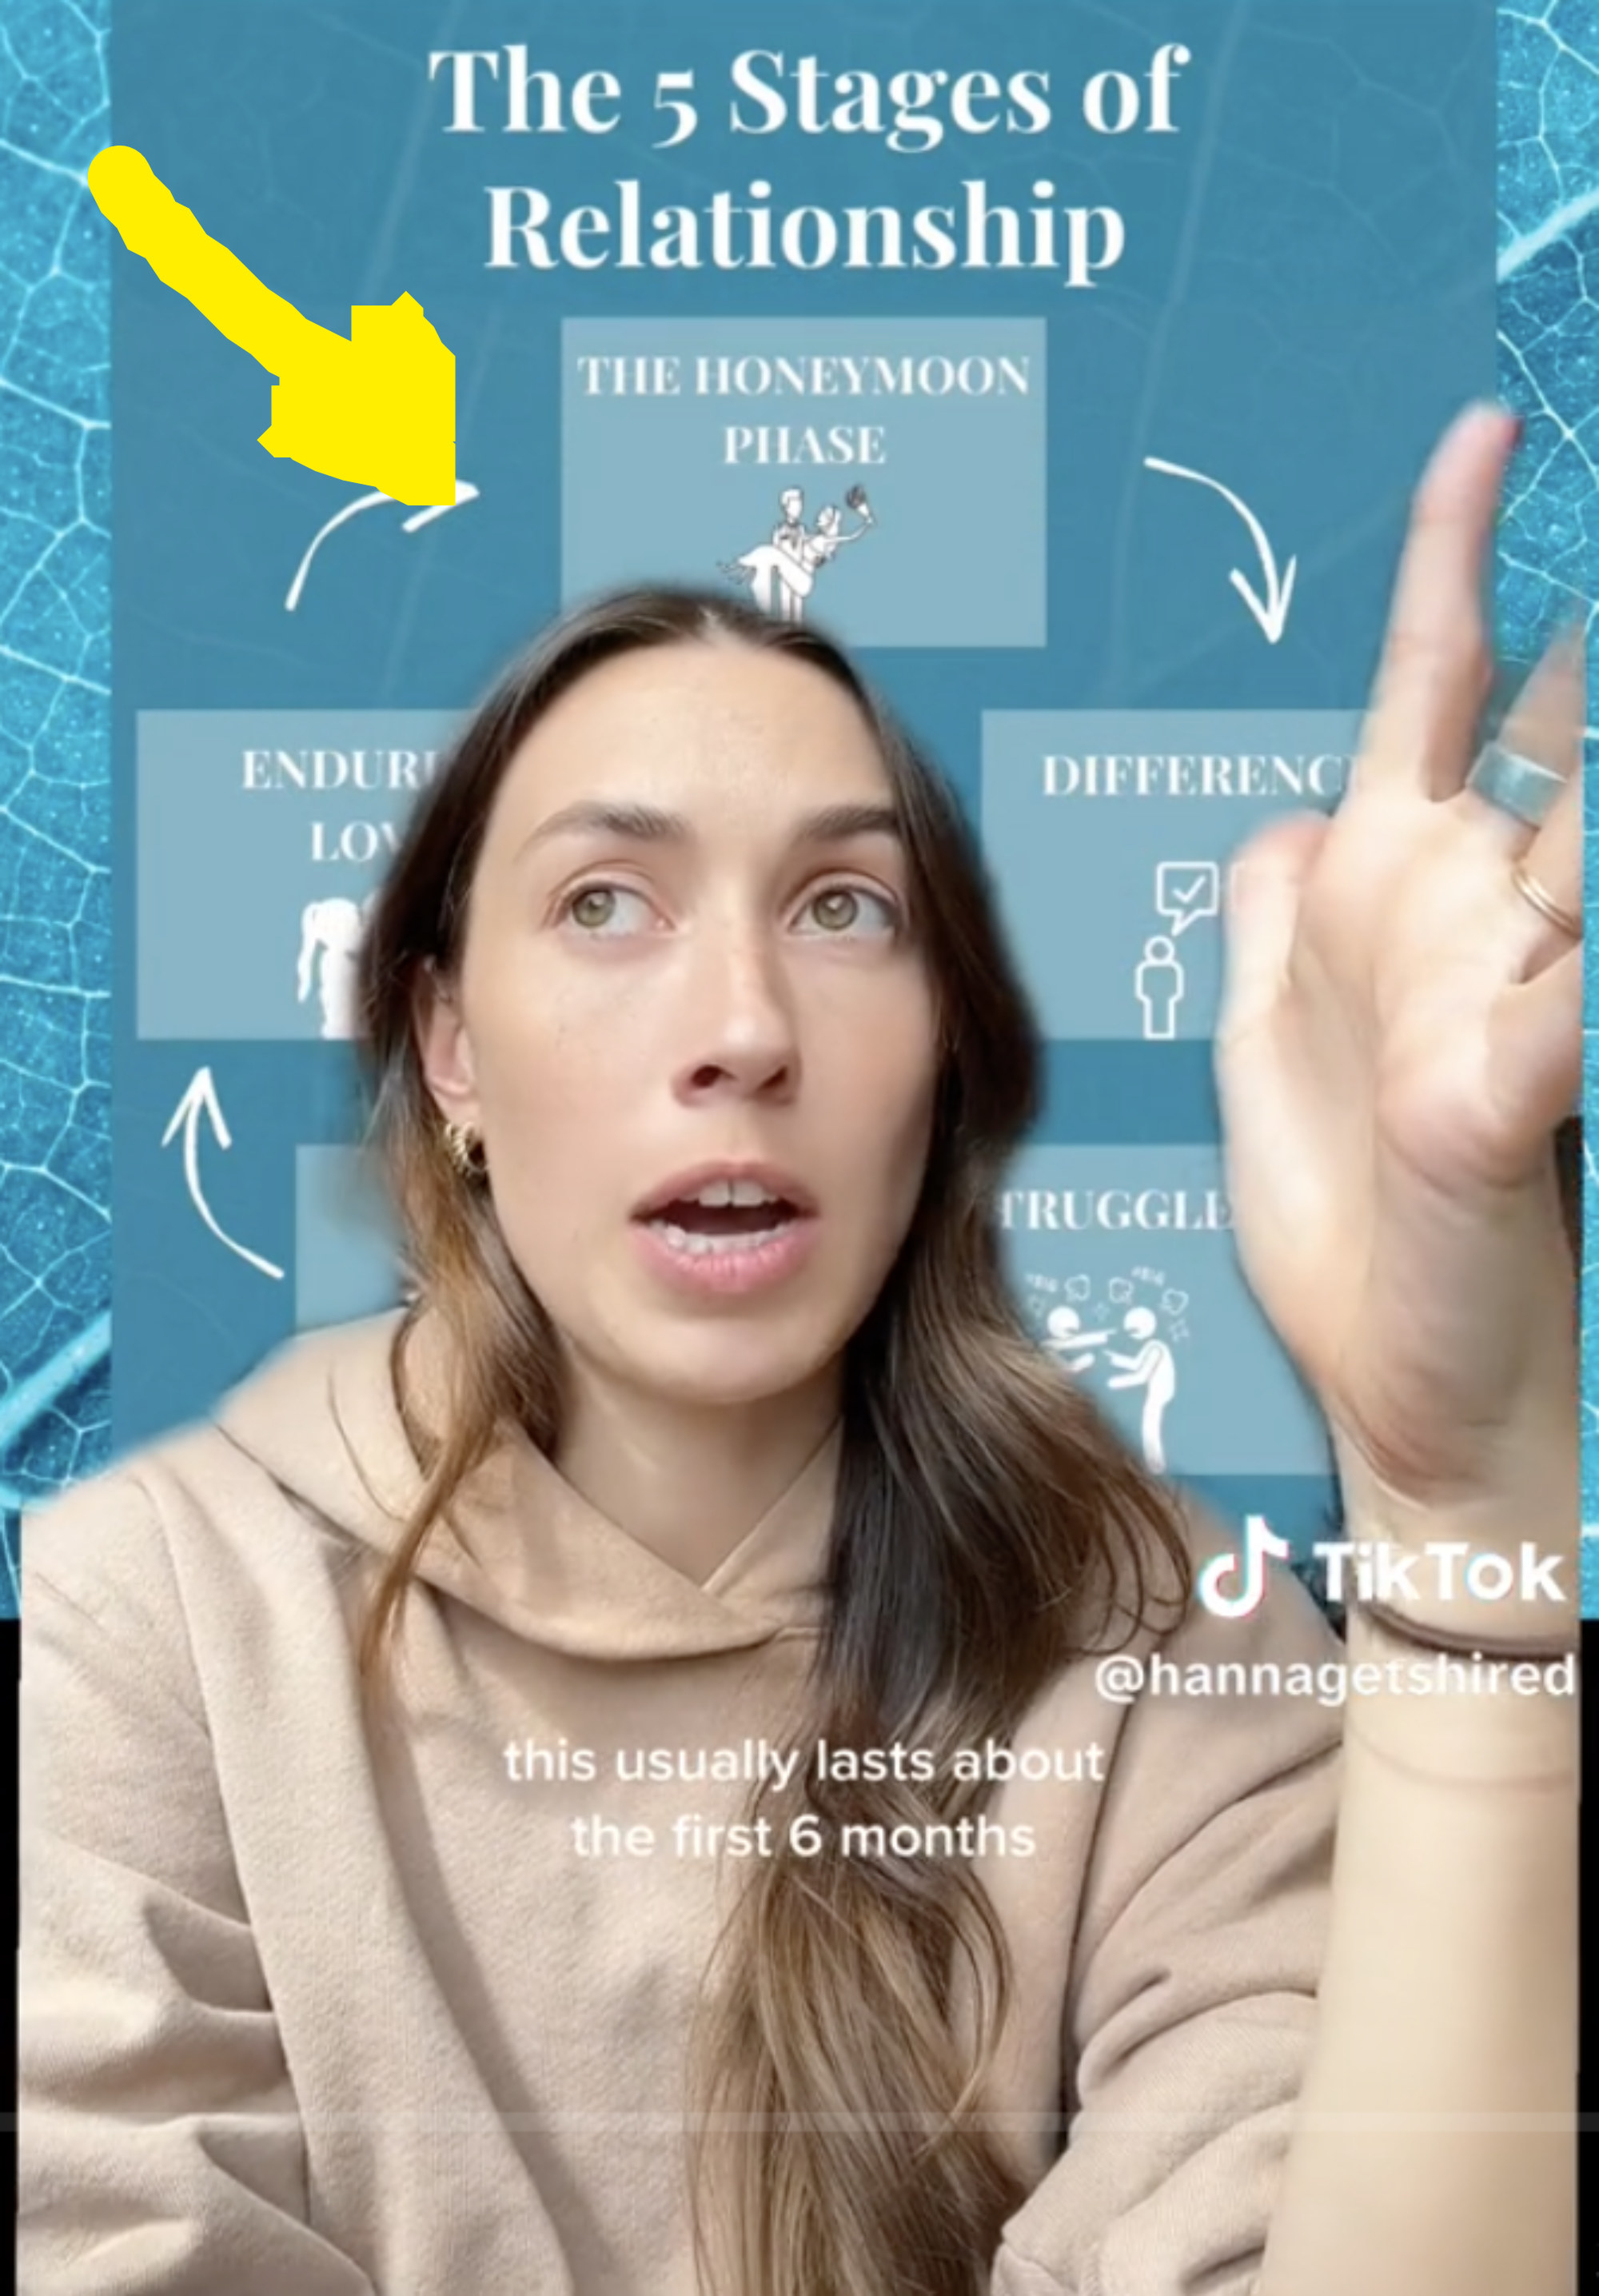 a girl talking to the camera in a tiktok video